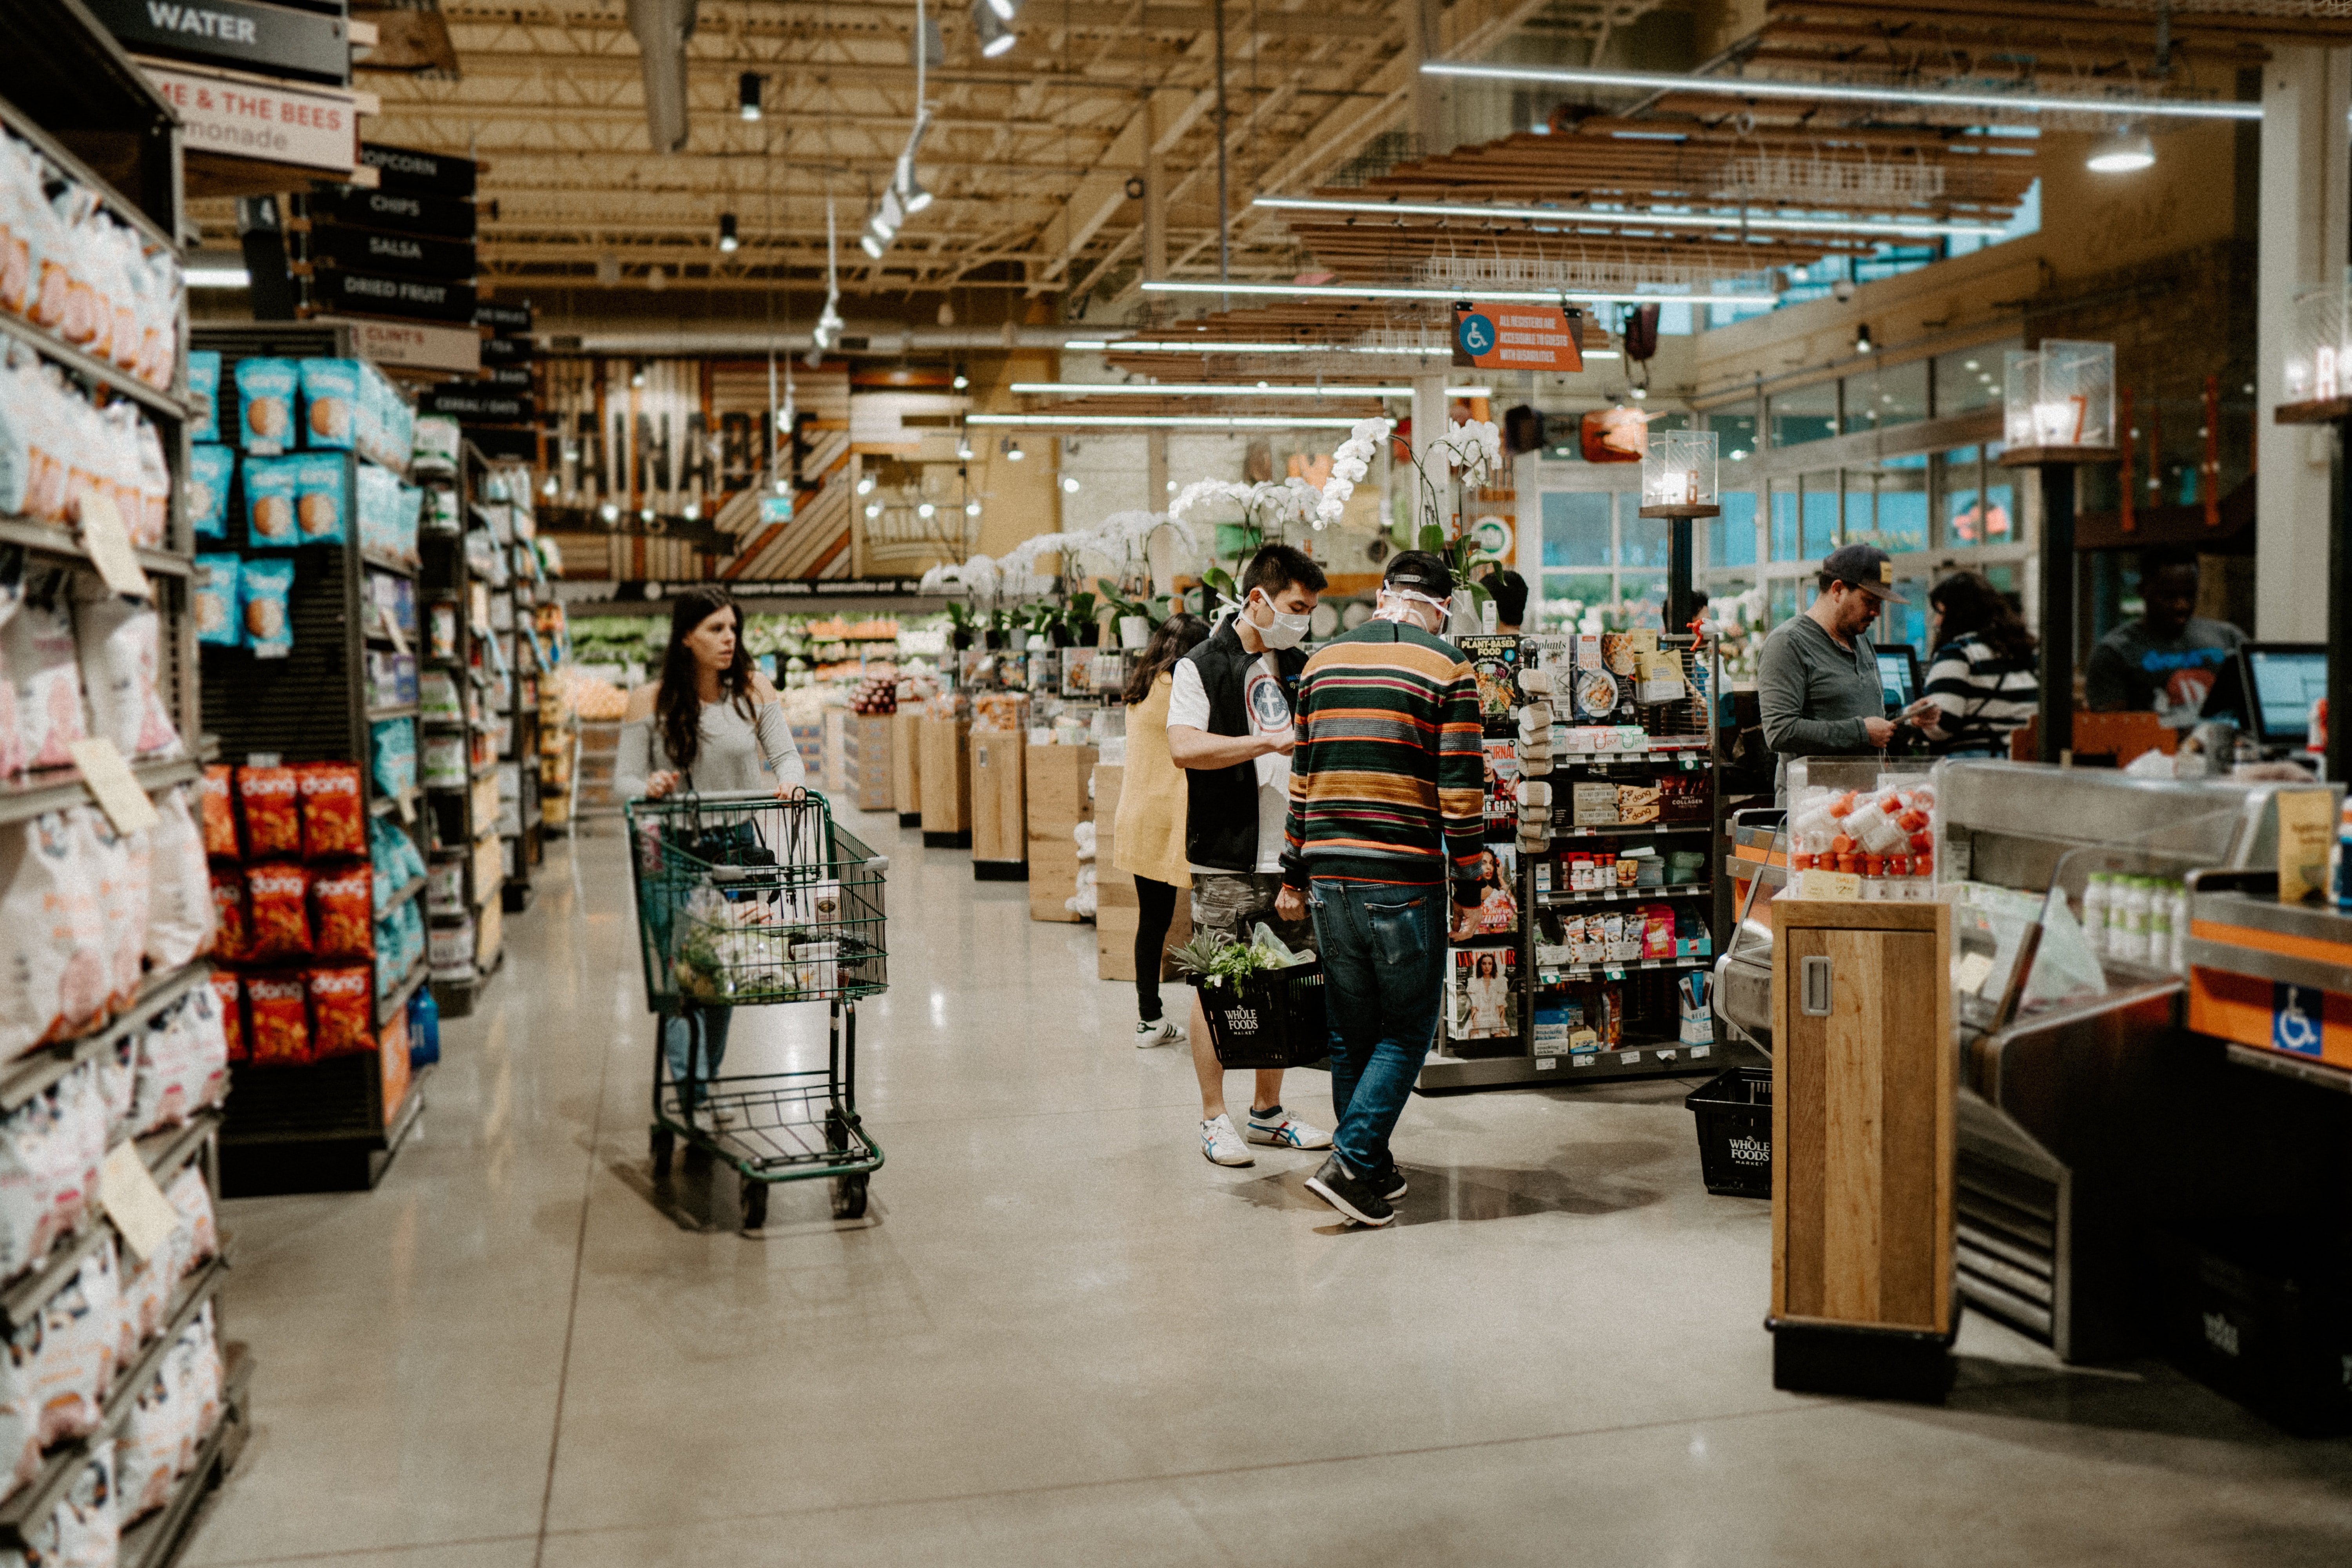 Exceptional walkability to every day wants and needs including Whole Foods